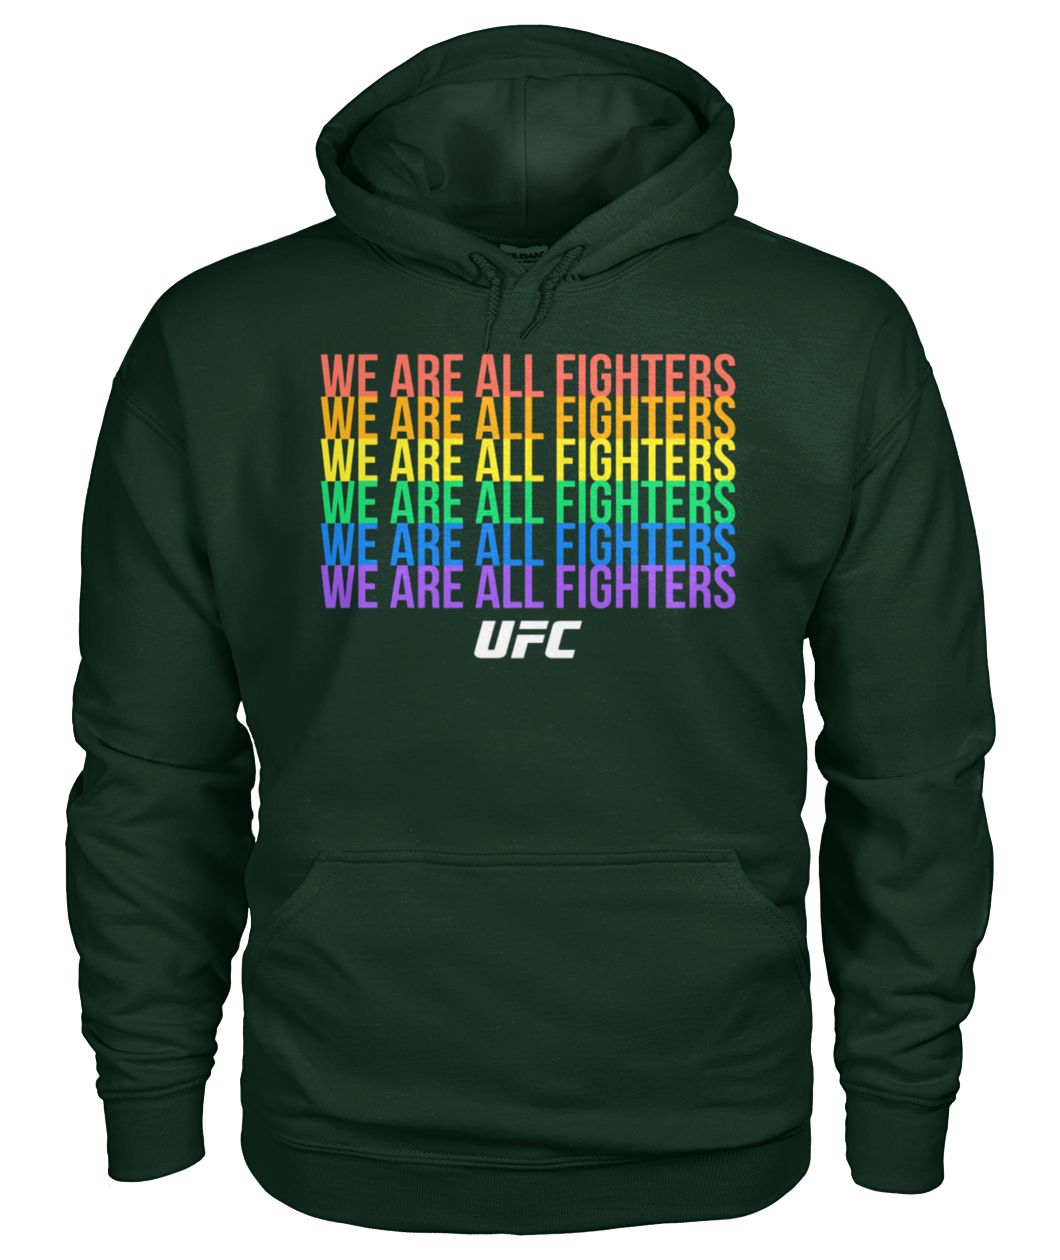 UFC we are all fighters LGBTQ gildan hoodie